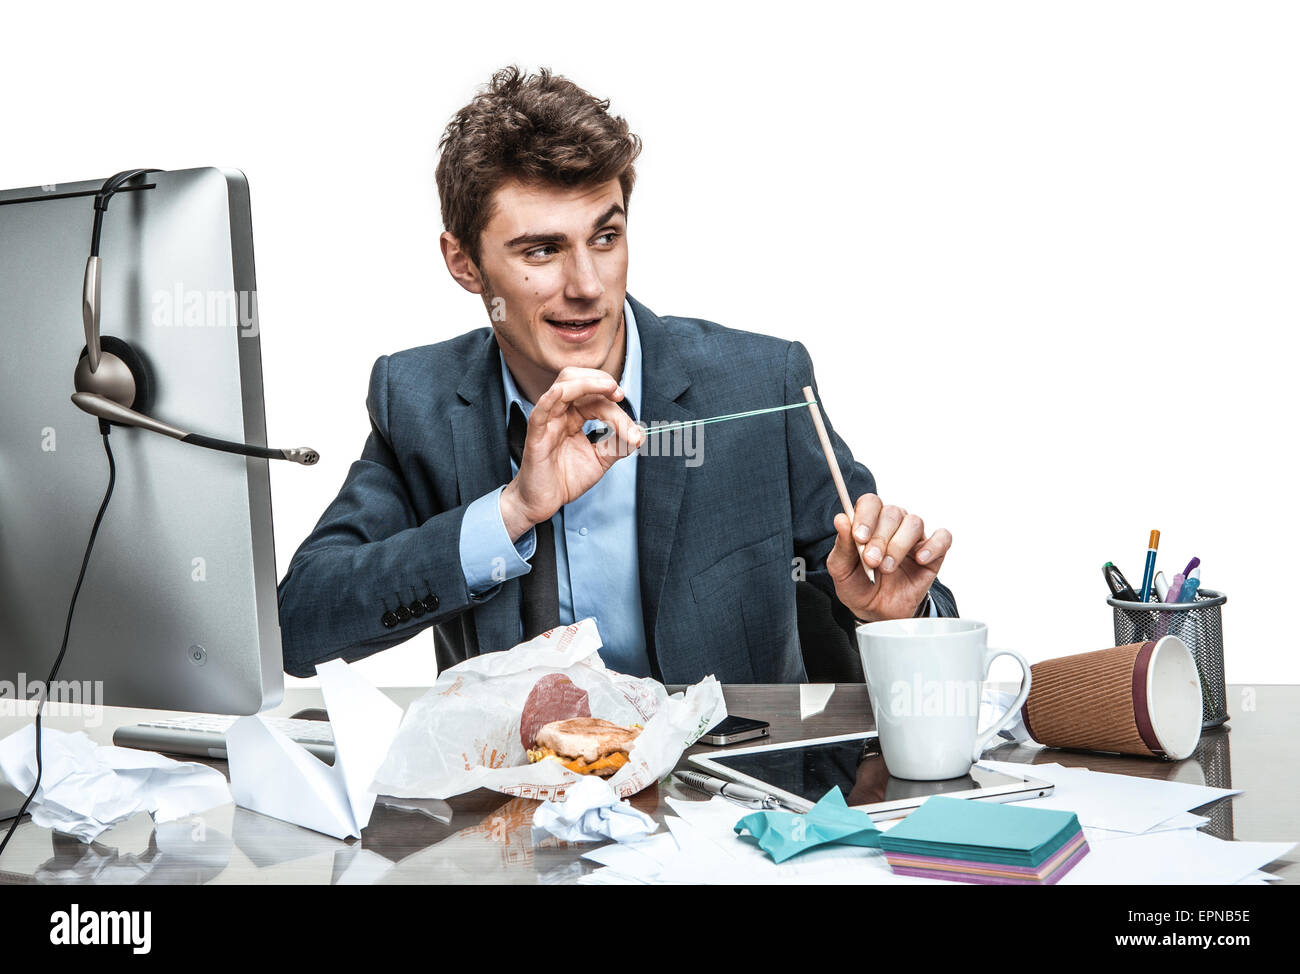 Сatapult slingshot / modern office man at working place, sloth and laziness concept Stock Photo